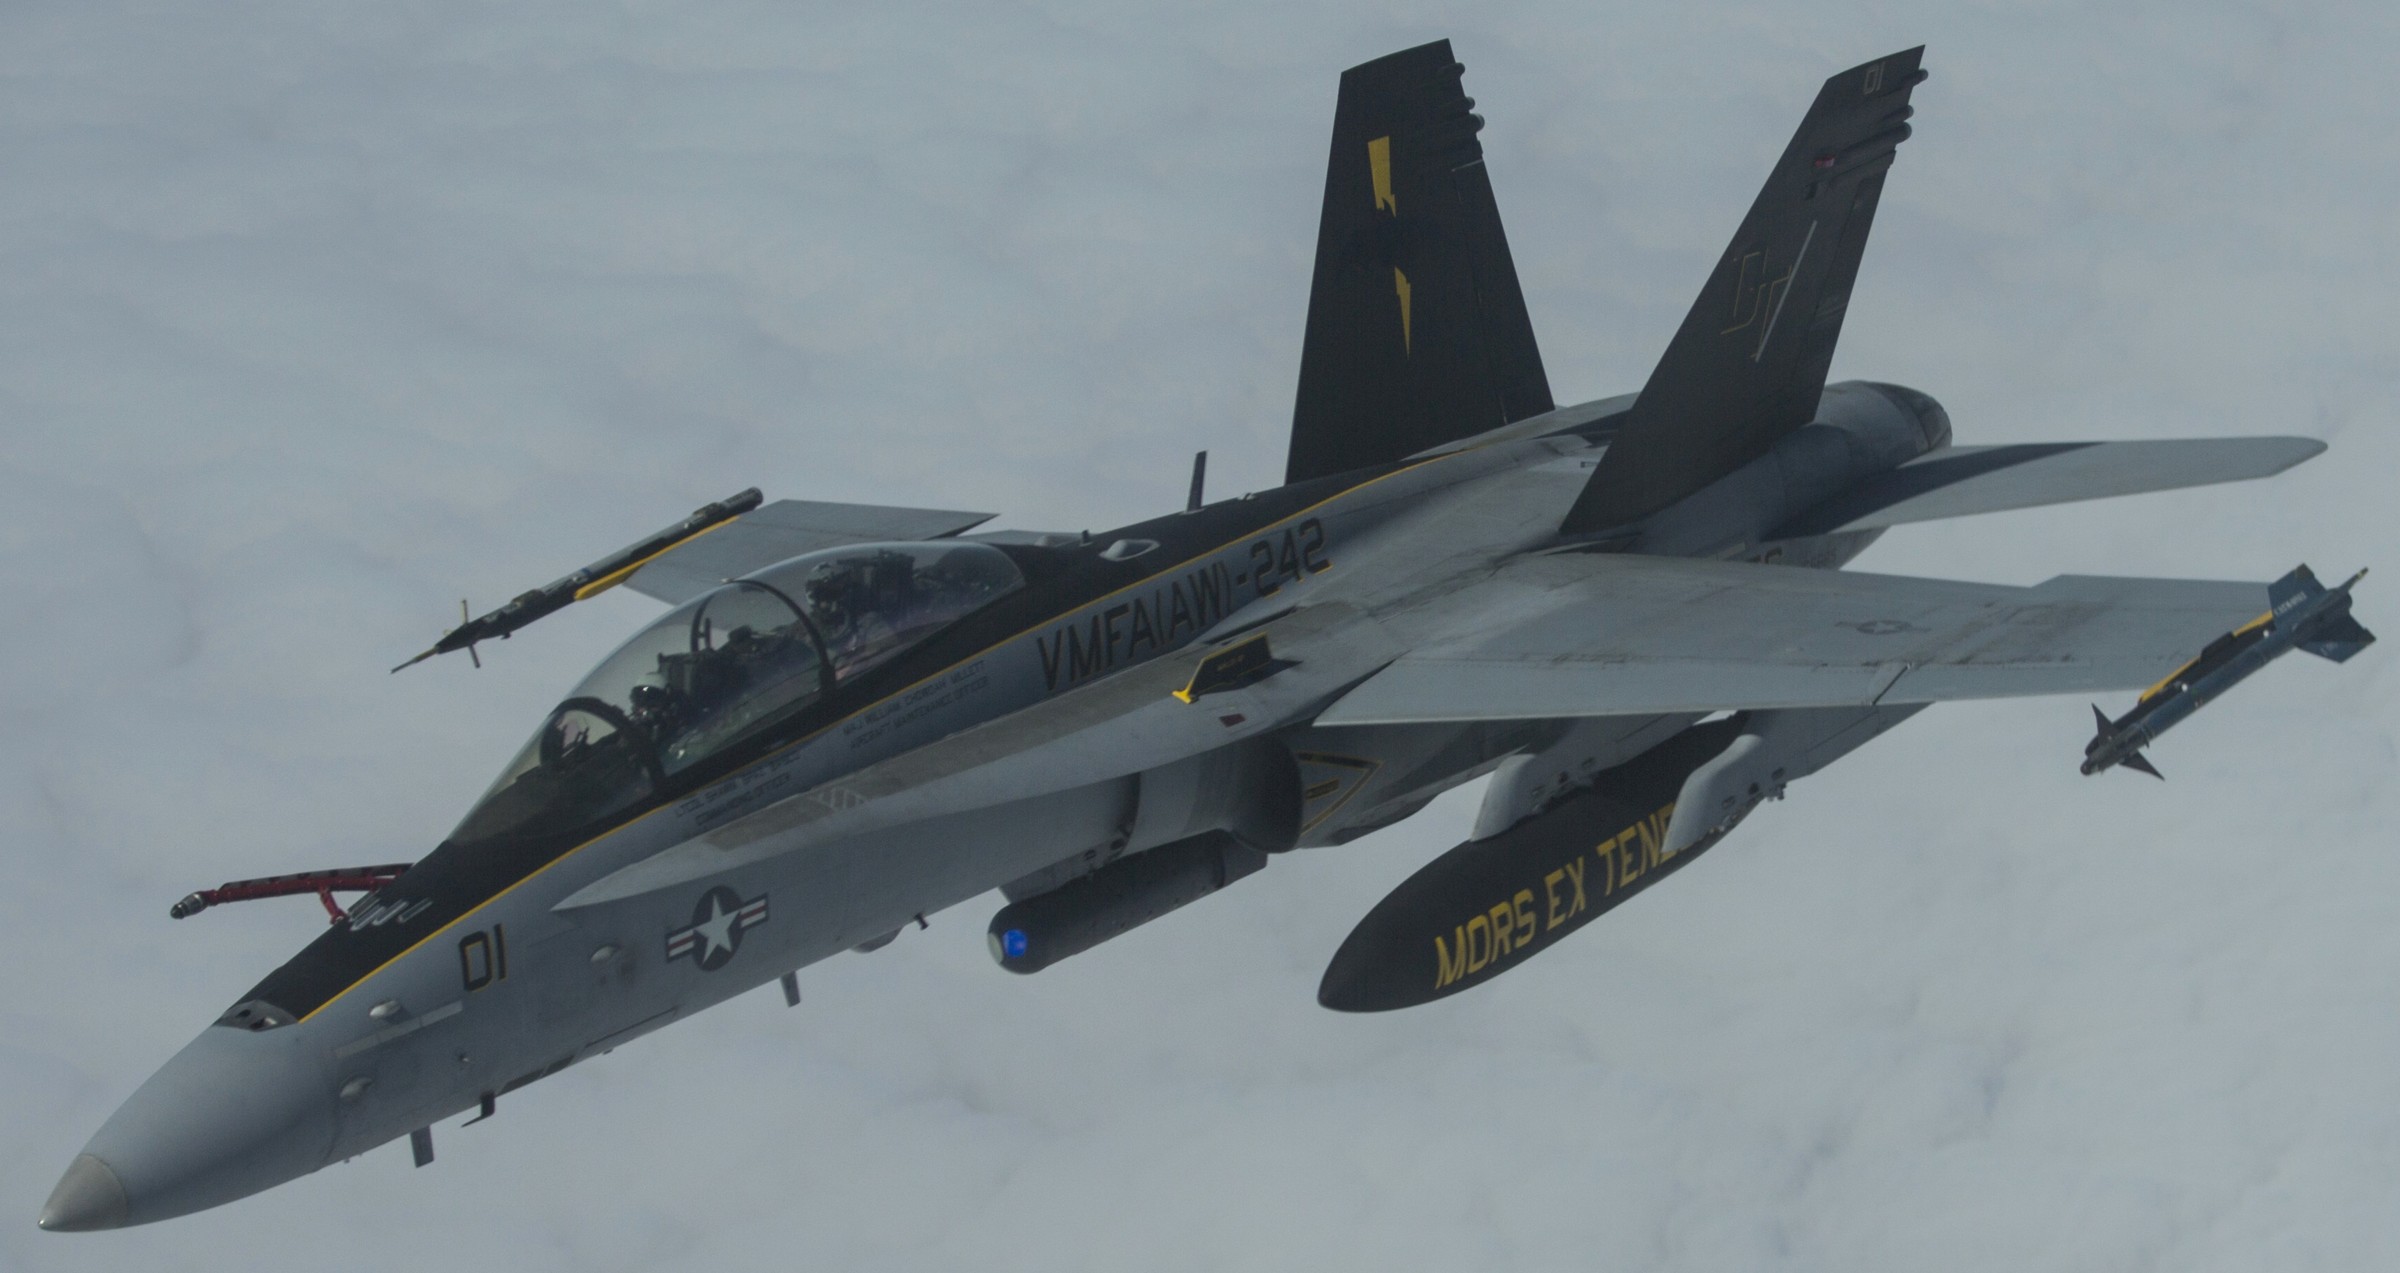 vmfa(aw)-242 bats marine all-weather fighter attack squadron usmc f/a-18d hornet 48 exercise northern edge alaska